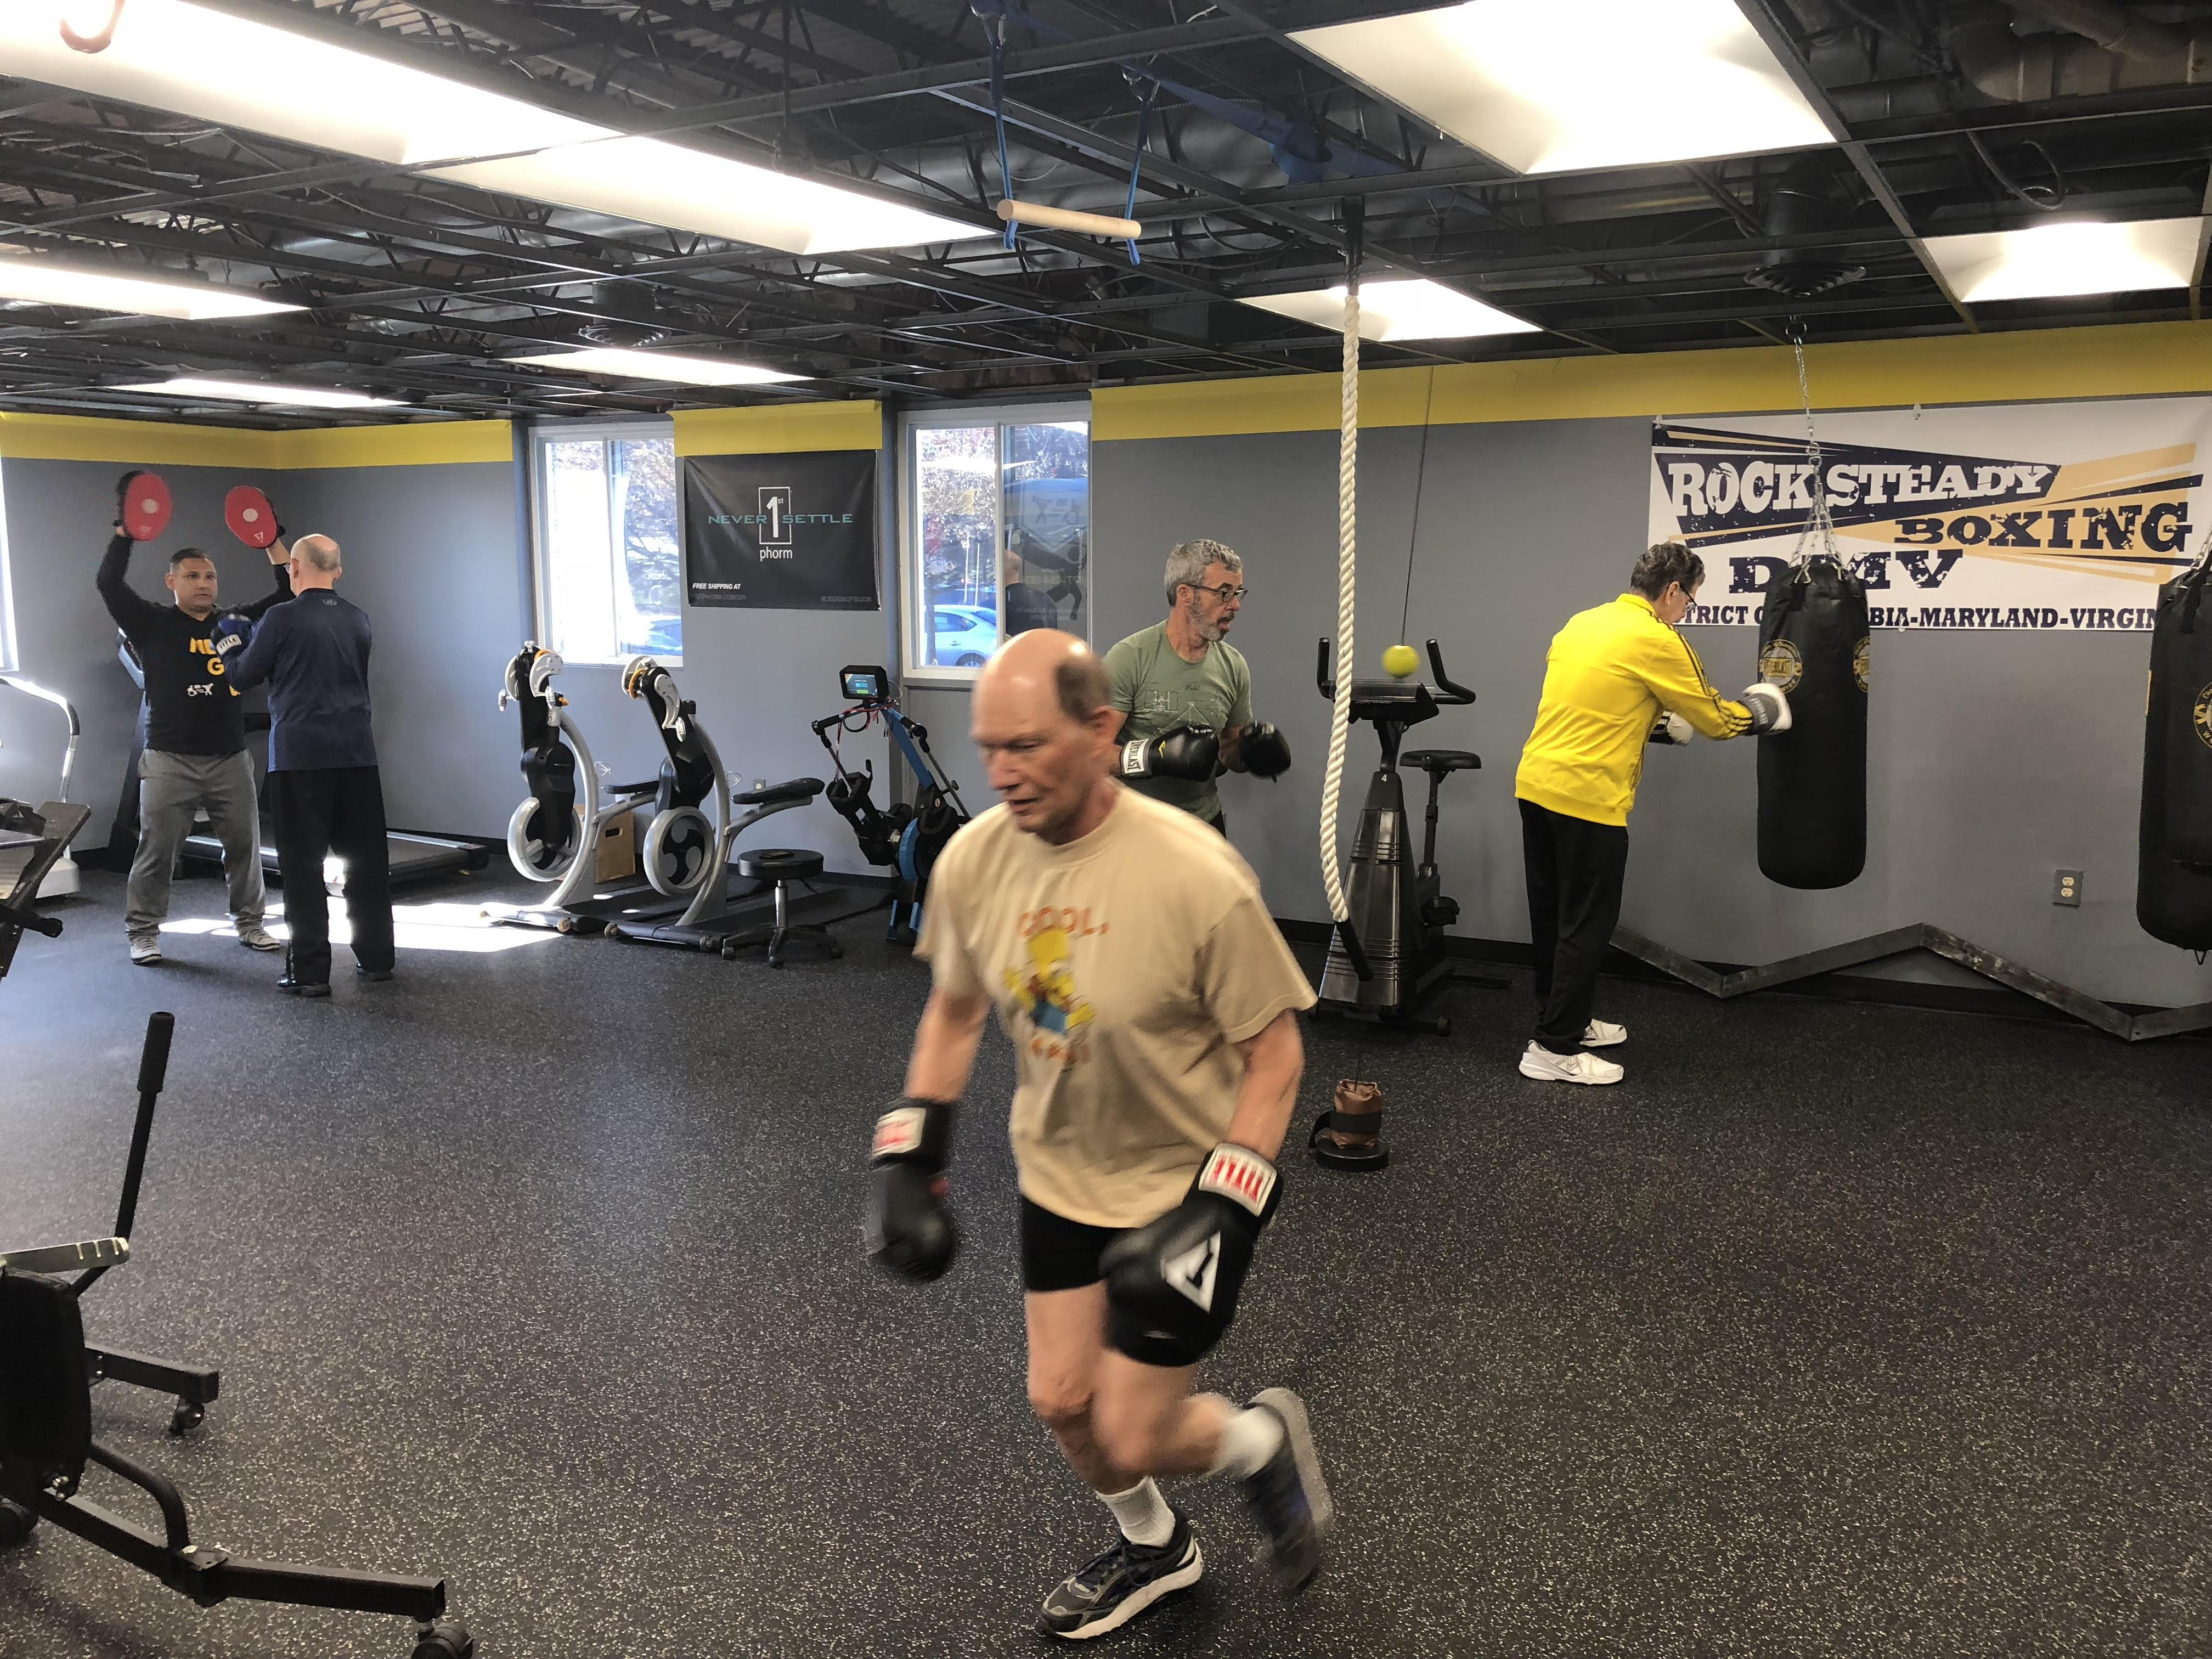 Wednesday-Rock Steady Boxing (For Parkinson's Clients) at DPI Adaptive Fitness ($25)